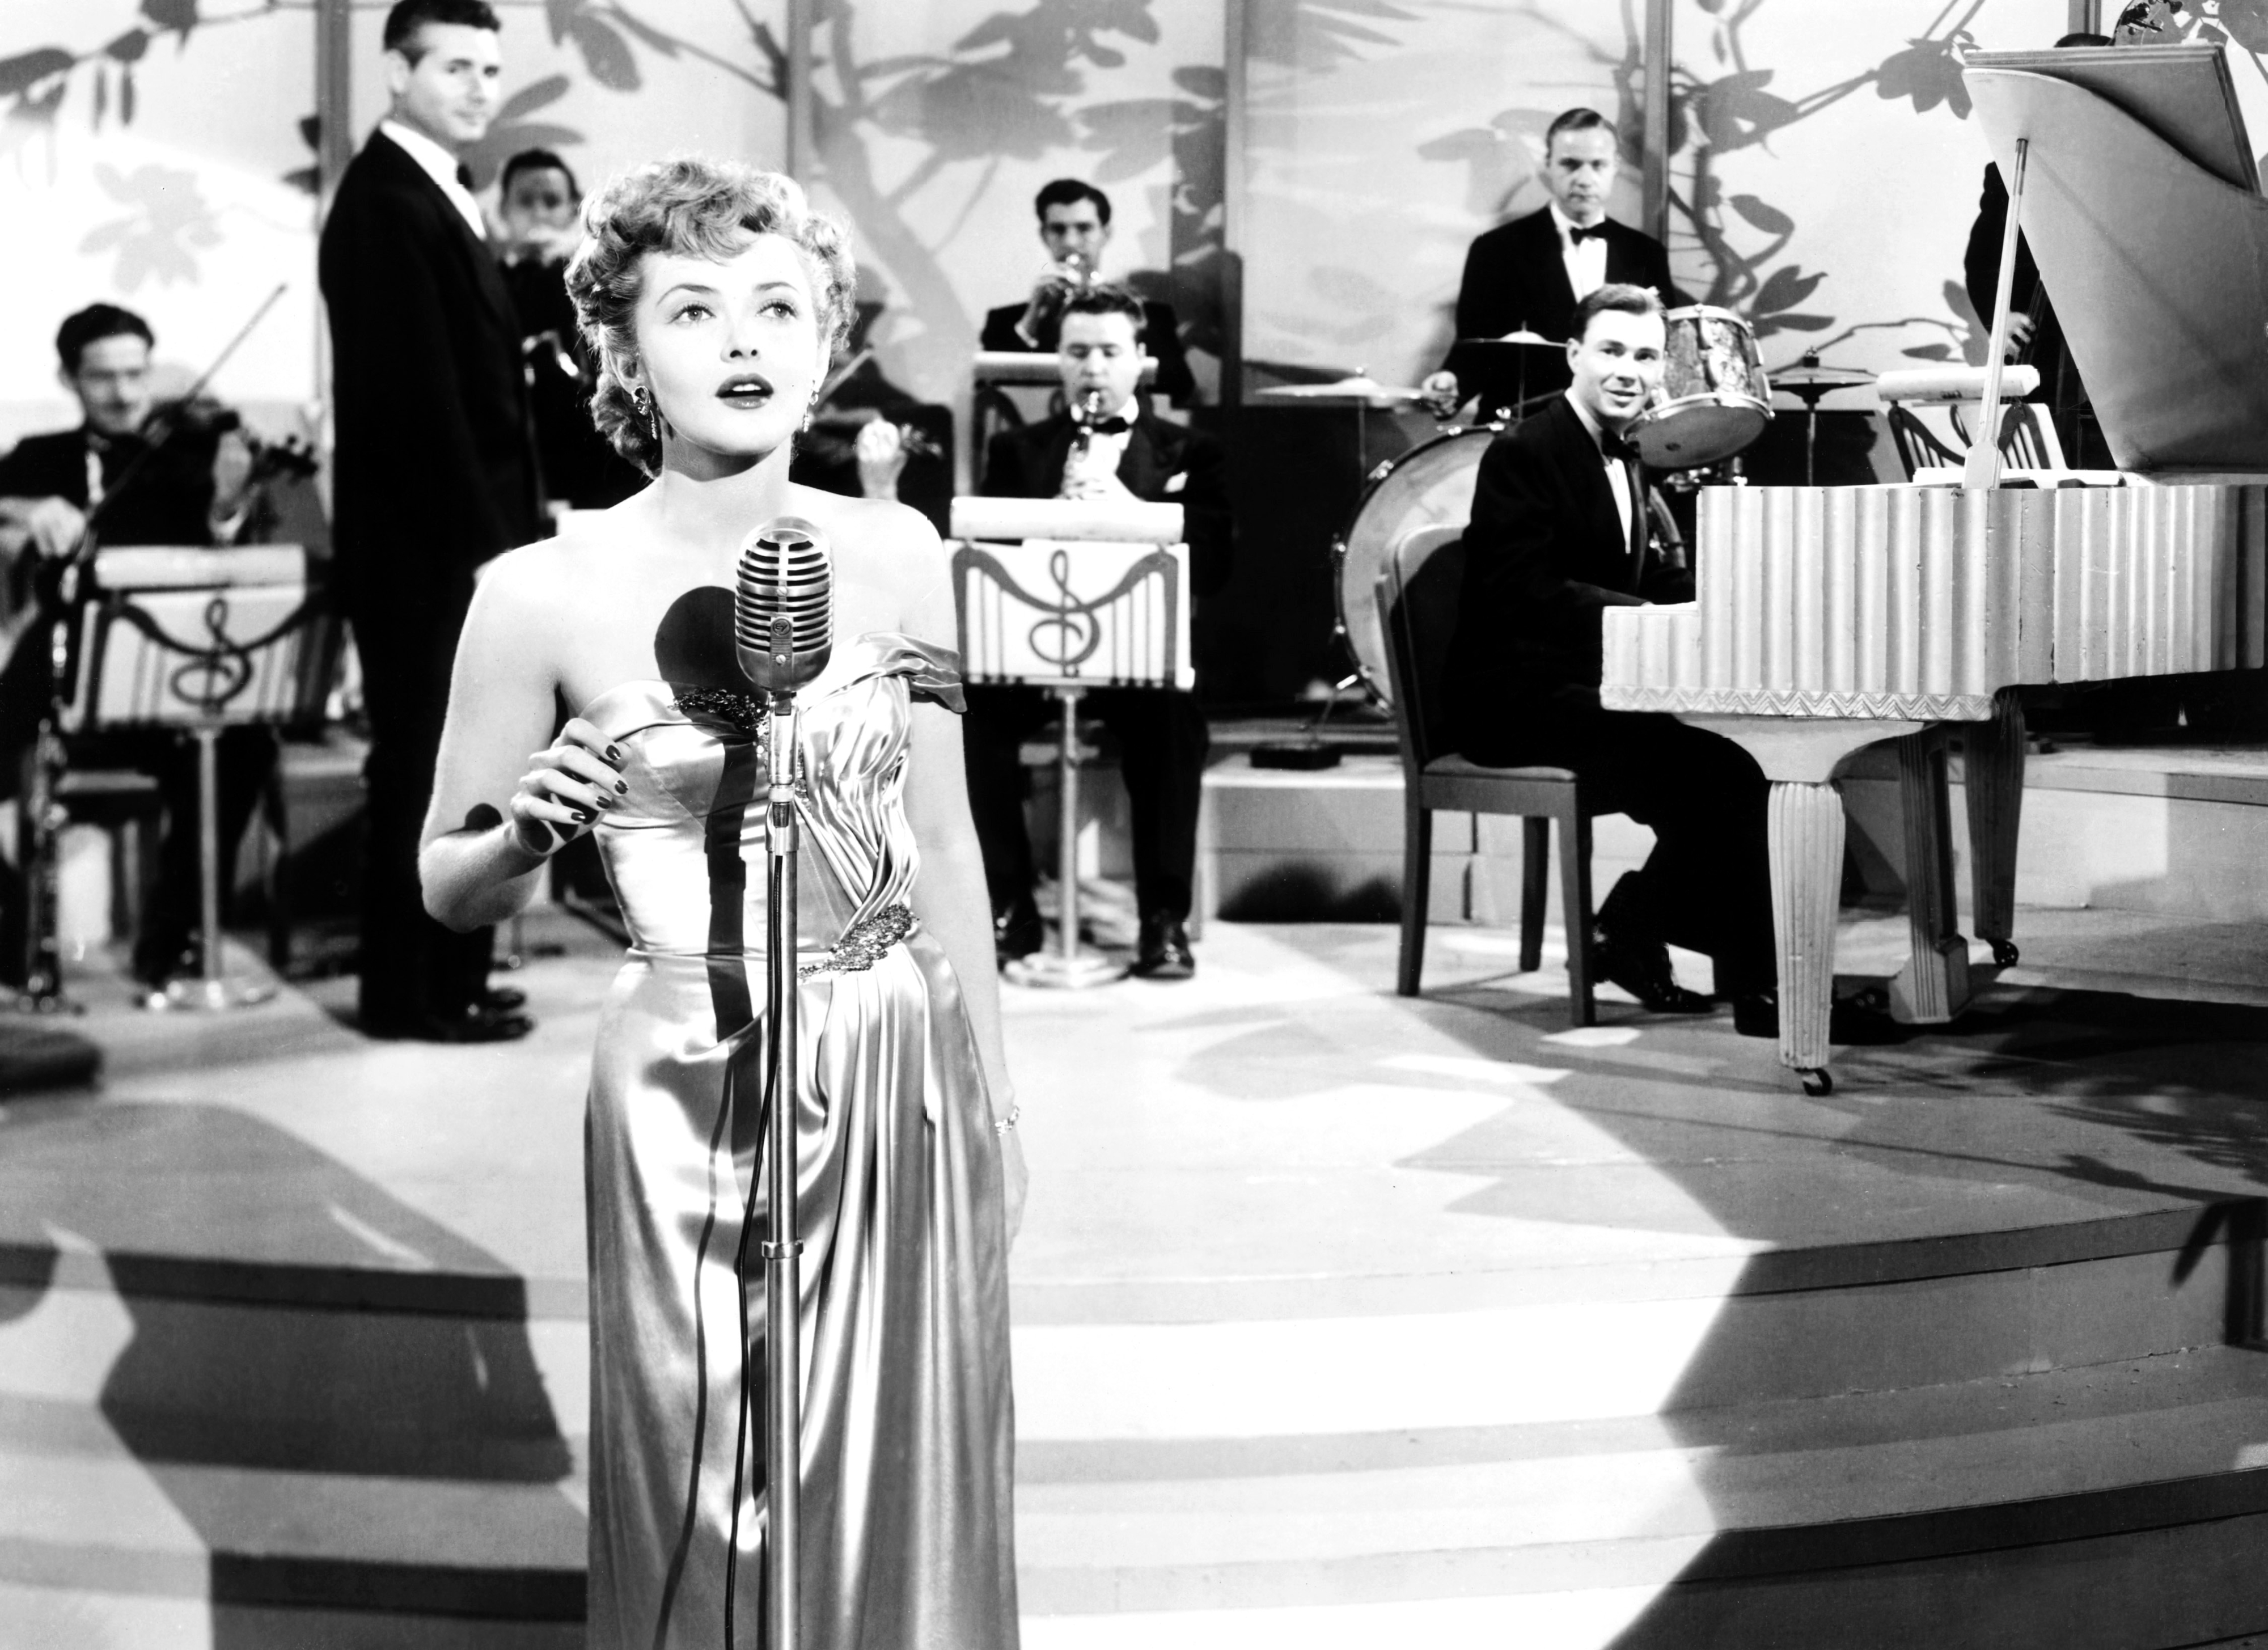 Kitty in elegant dress sings into vintage microphone on stage, band with pianist in background